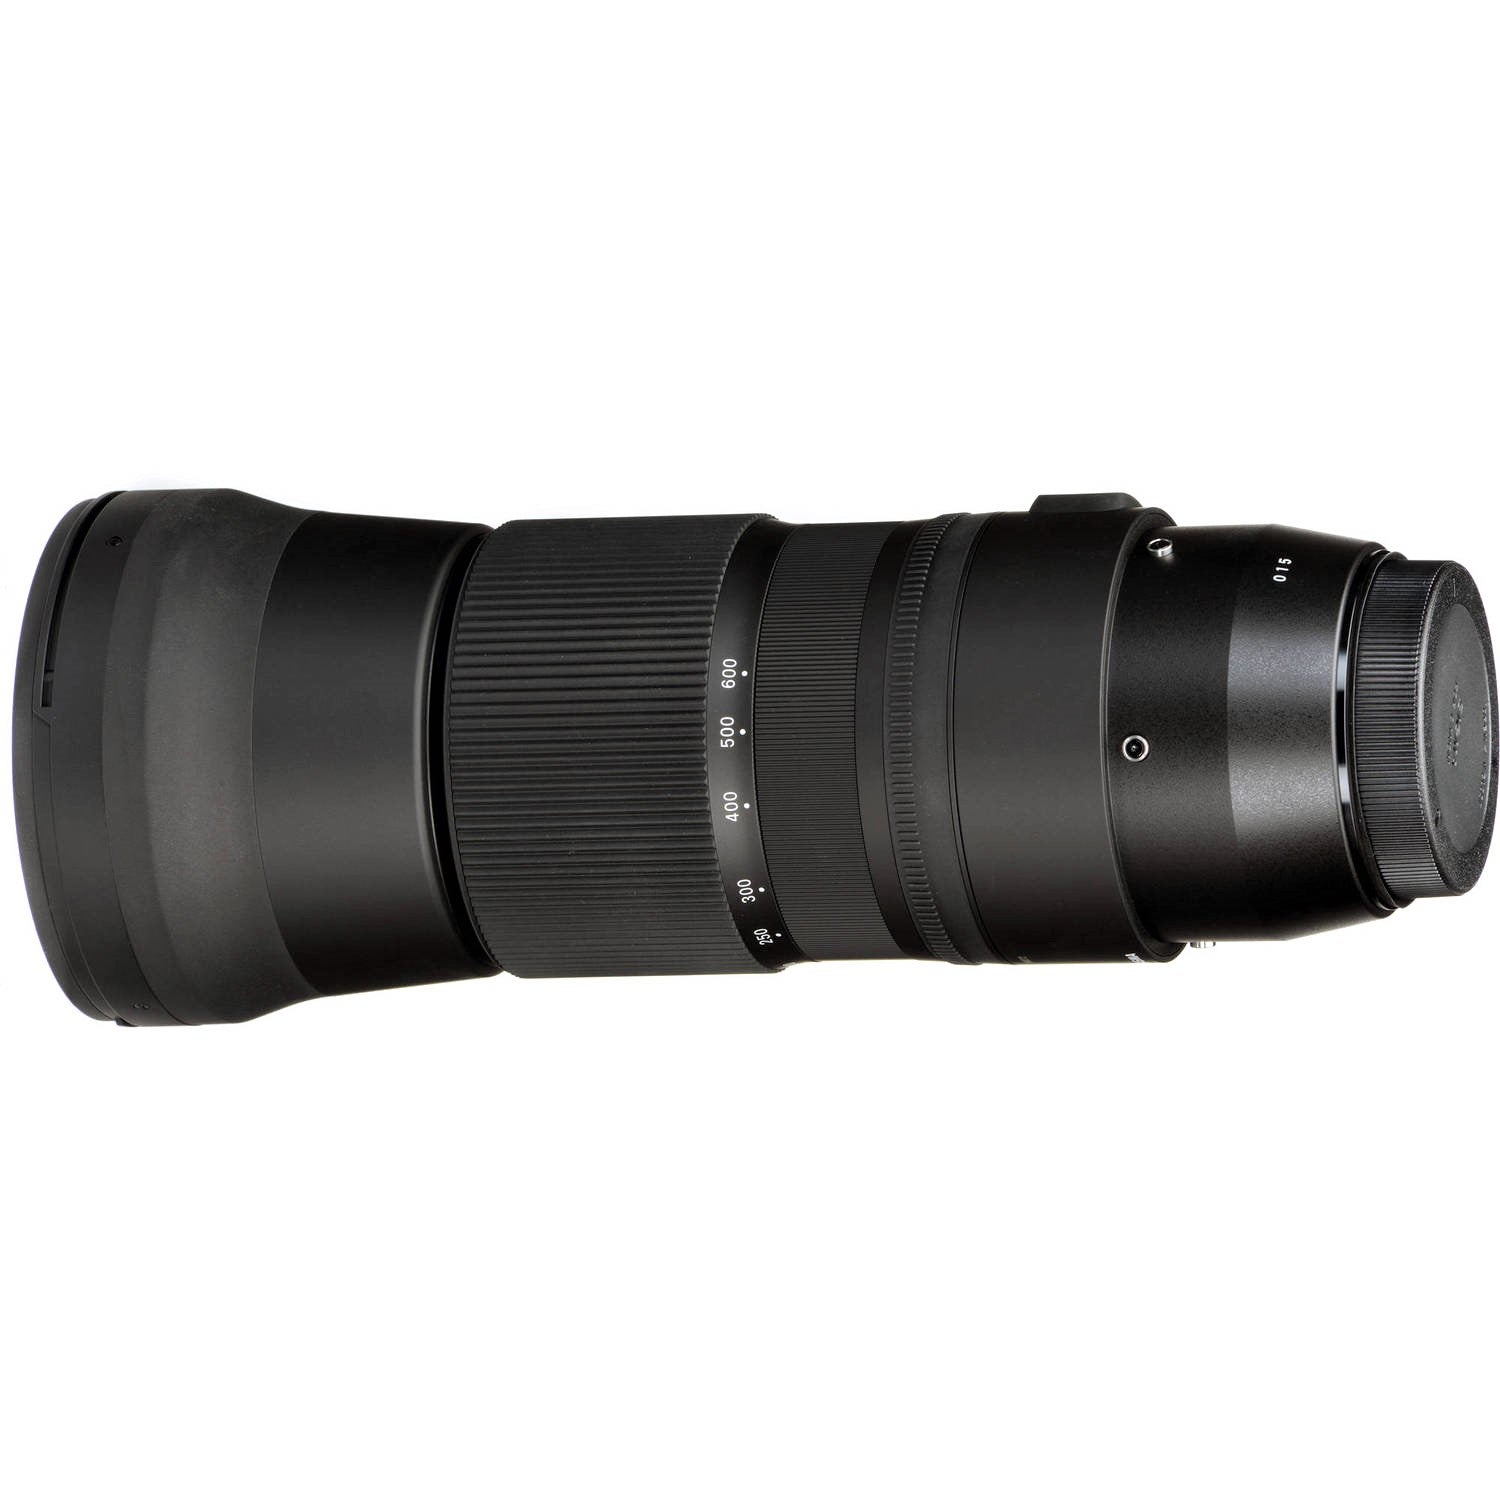 Sigma 150-600mm F5-6.3 DG OS HSM | C Overview